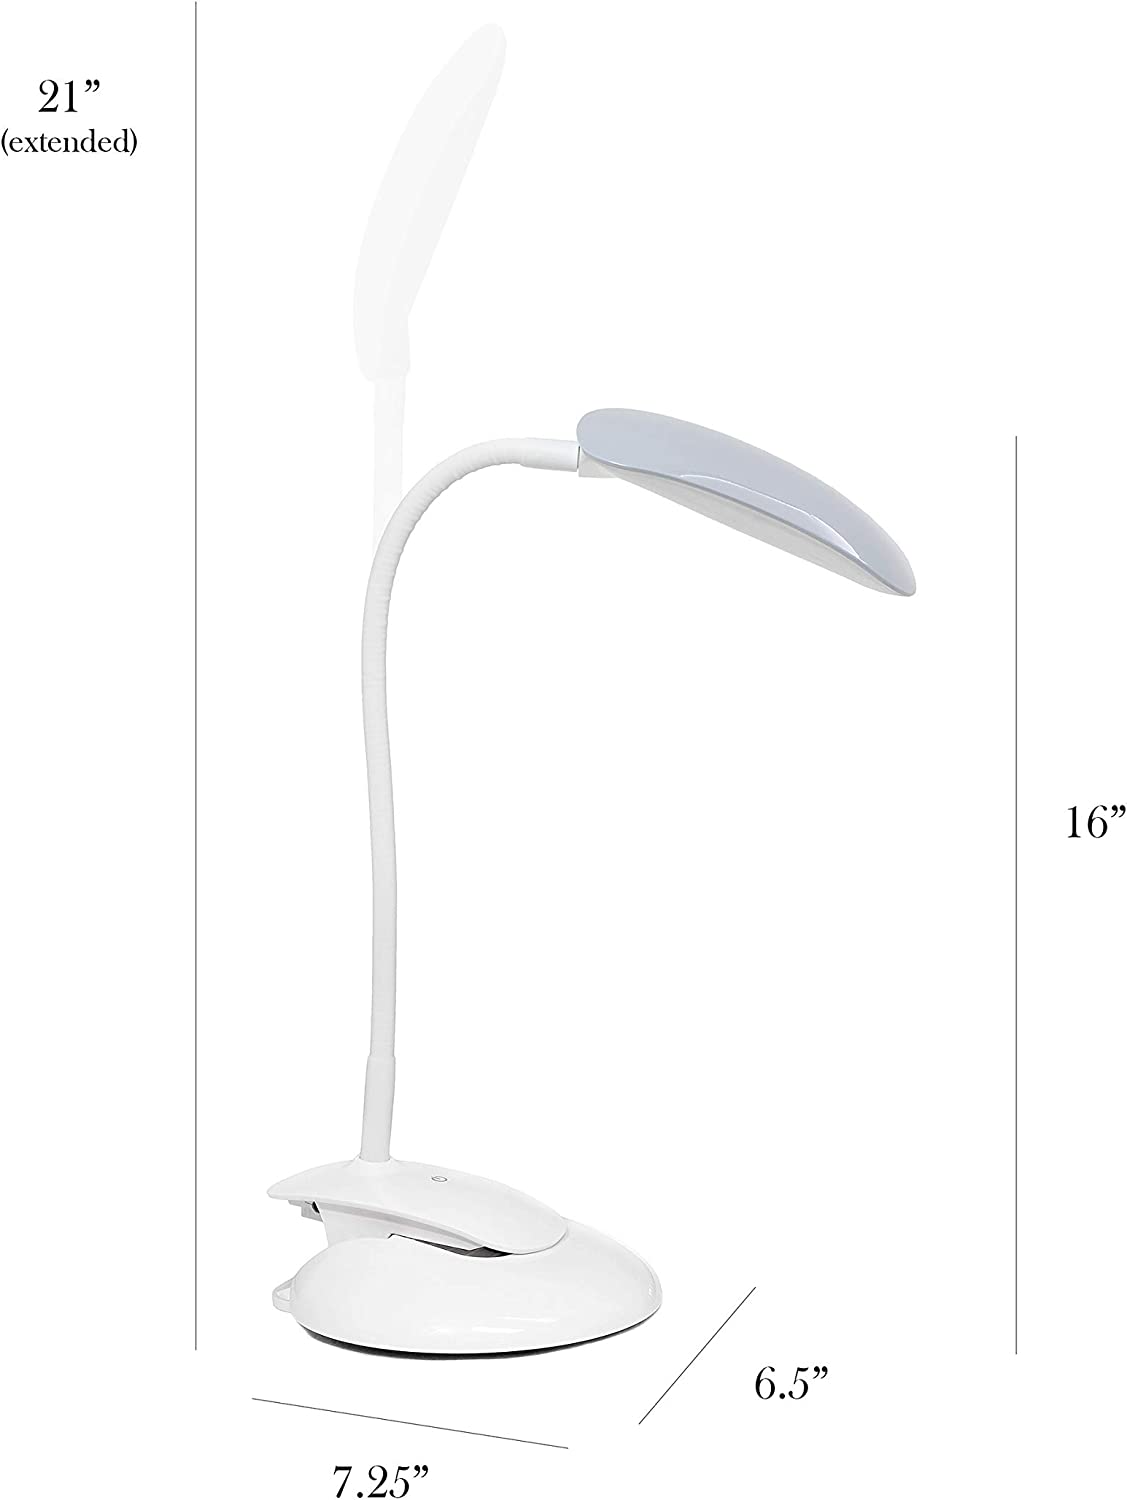 Simple Designs LD2021-GRY Flexi Rounded Clip Light LED Desk Lamp, Gray